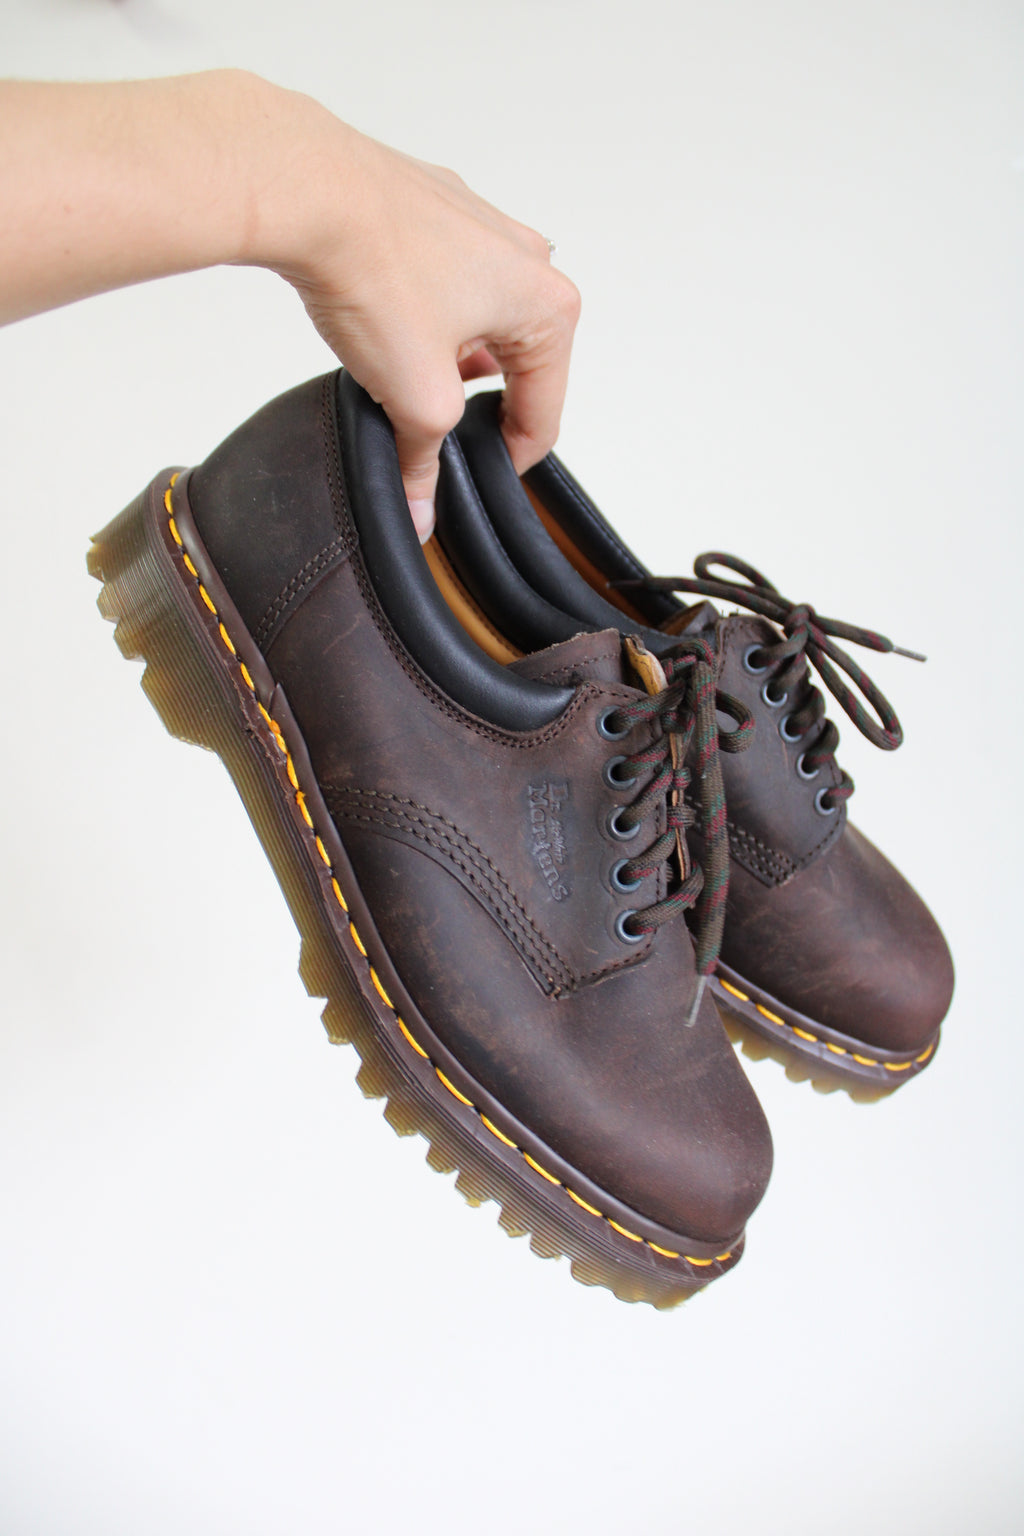 Dr. Martens Brown Oxford Shoes | Size 8